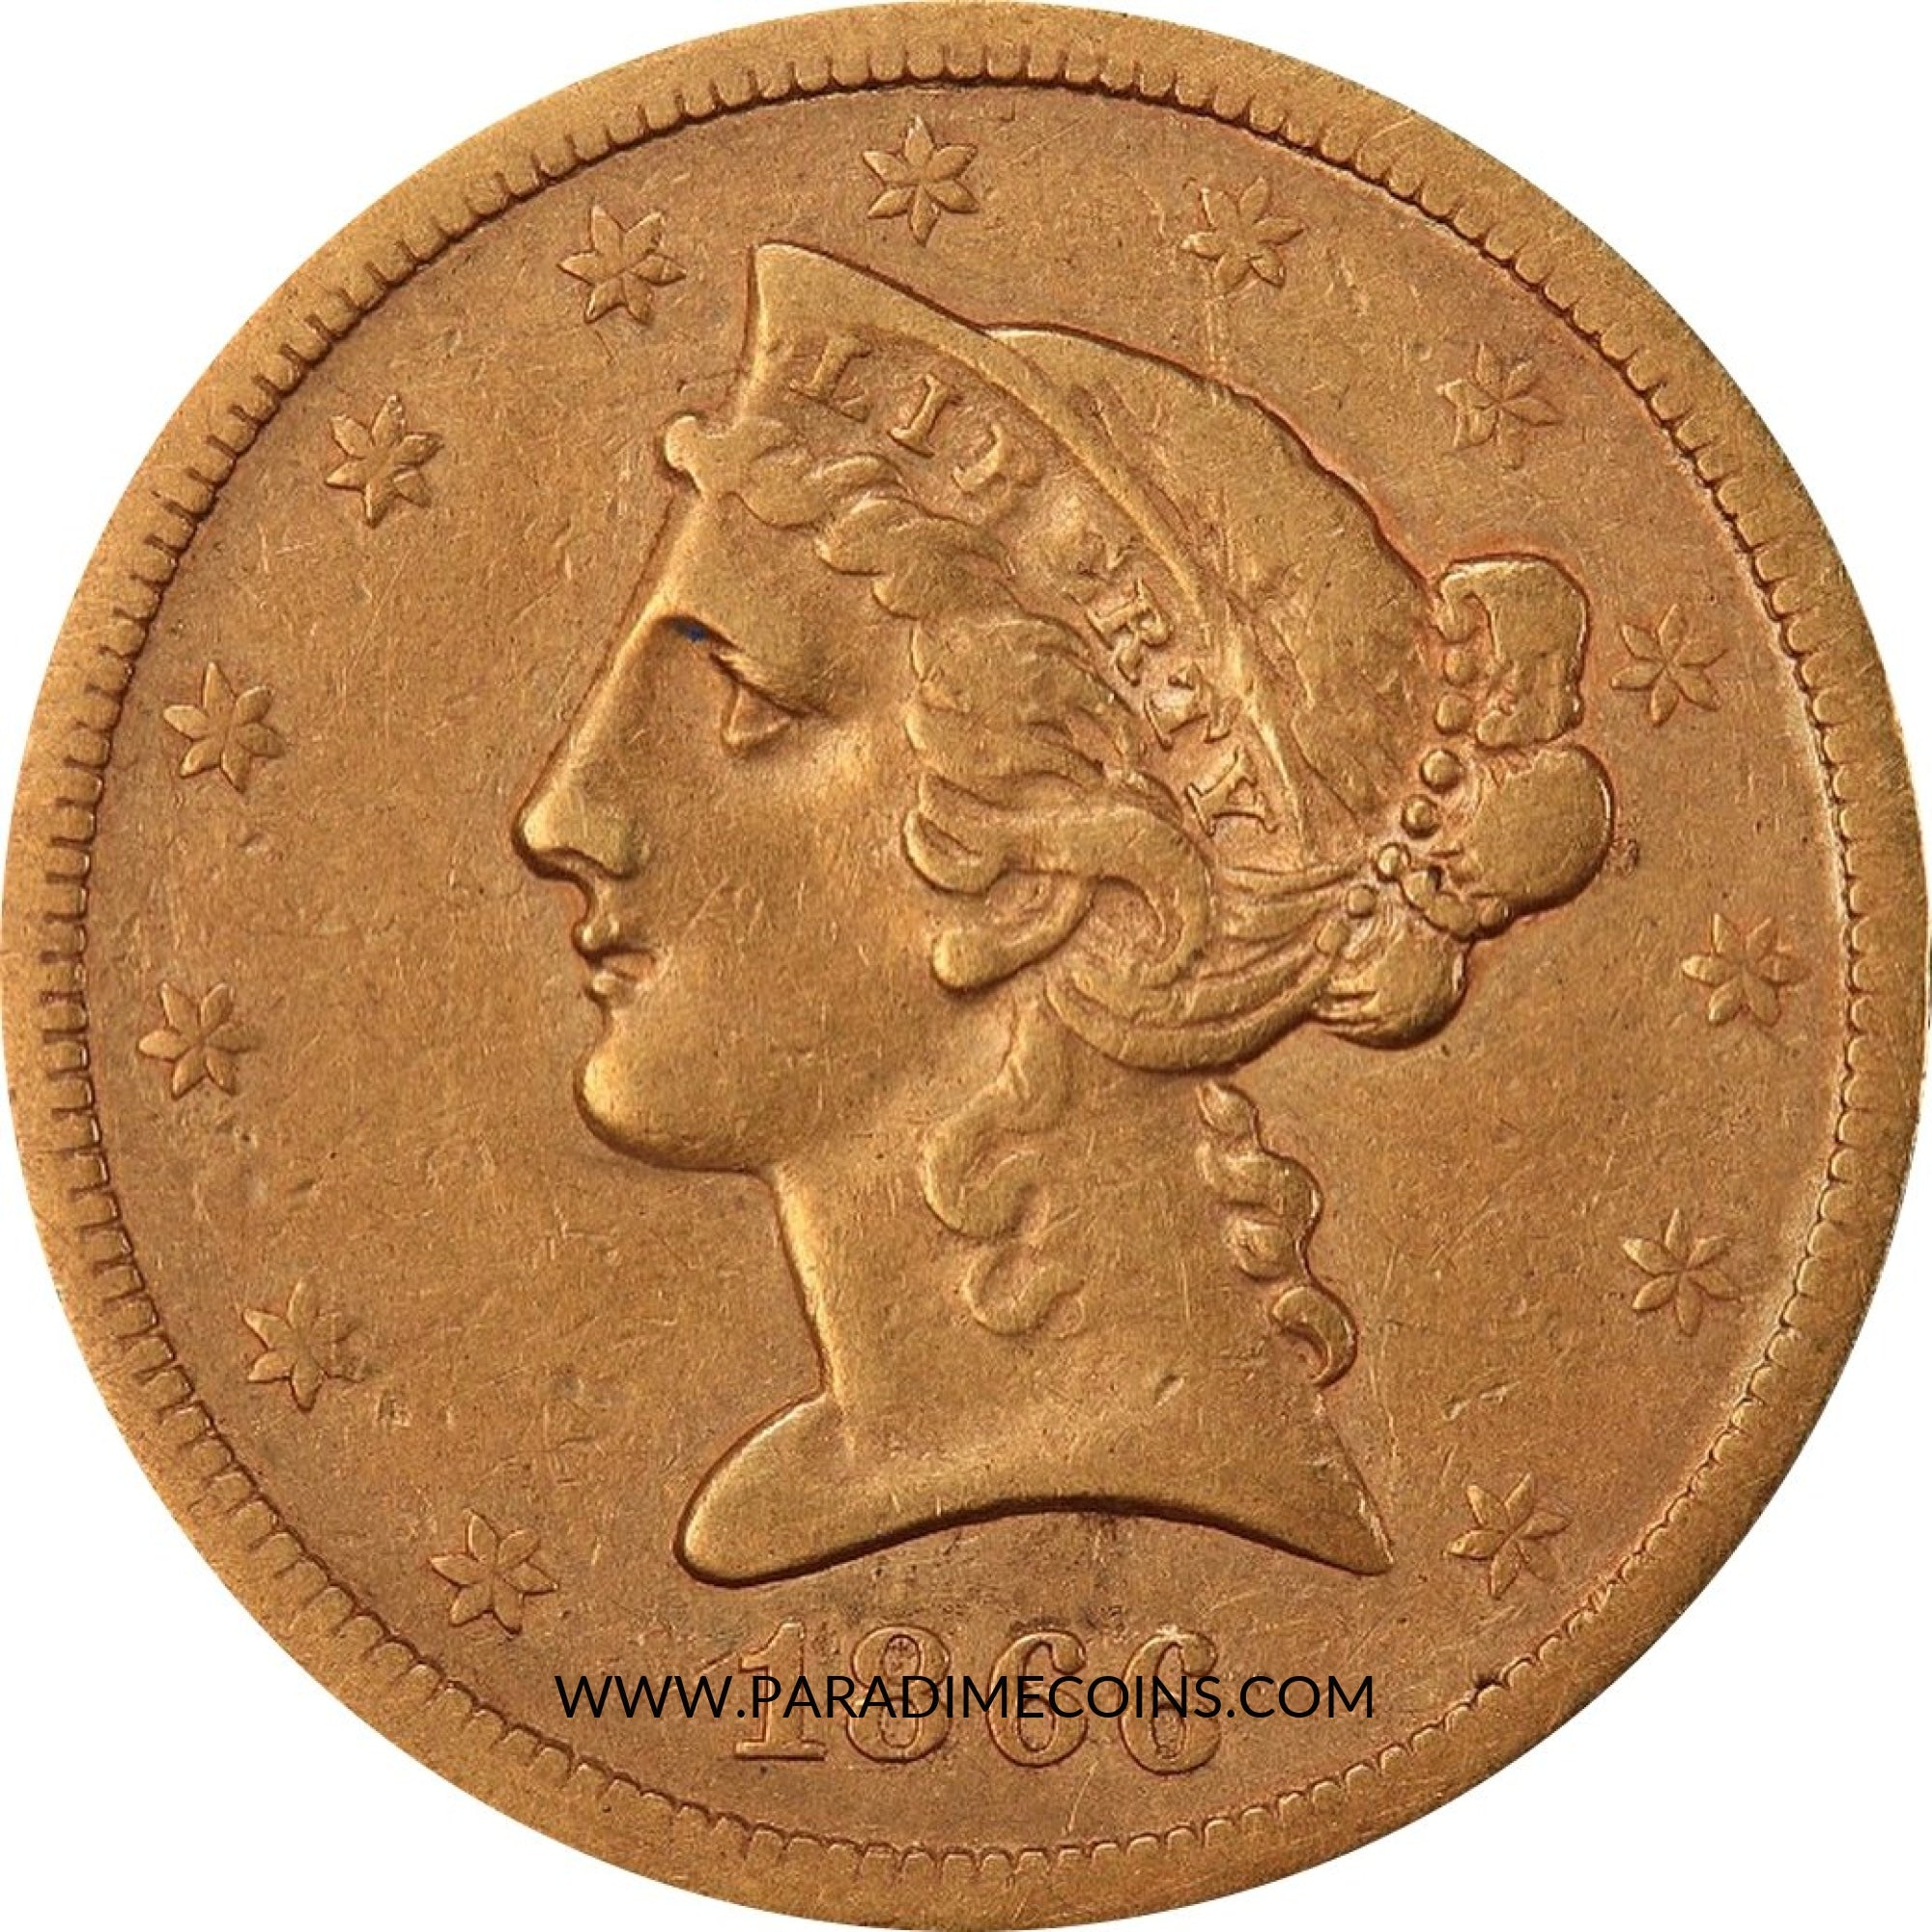 1866-S $5 MOTTTO VF35 PCGS. - Paradime Coins | PCGS NGC CACG CAC Rare US Numismatic Coins For Sale